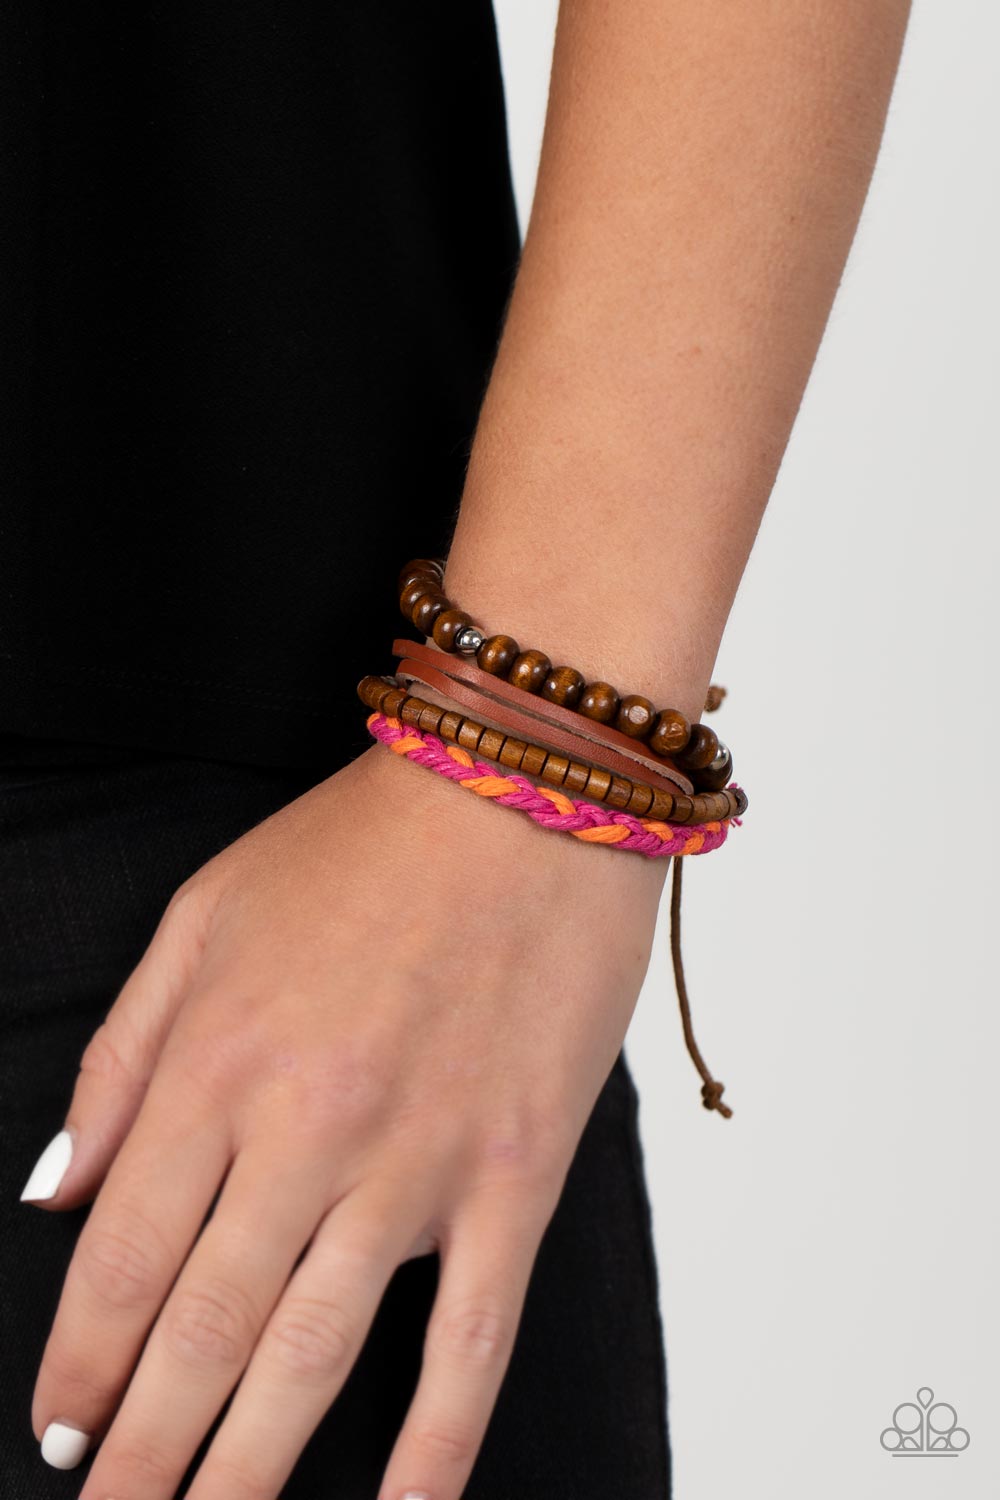 Timberland Trendsetter Pink and Brown Urban Bracelet - Paparazzi Accessories- lightbox - CarasShop.com - $5 Jewelry by Cara Jewels